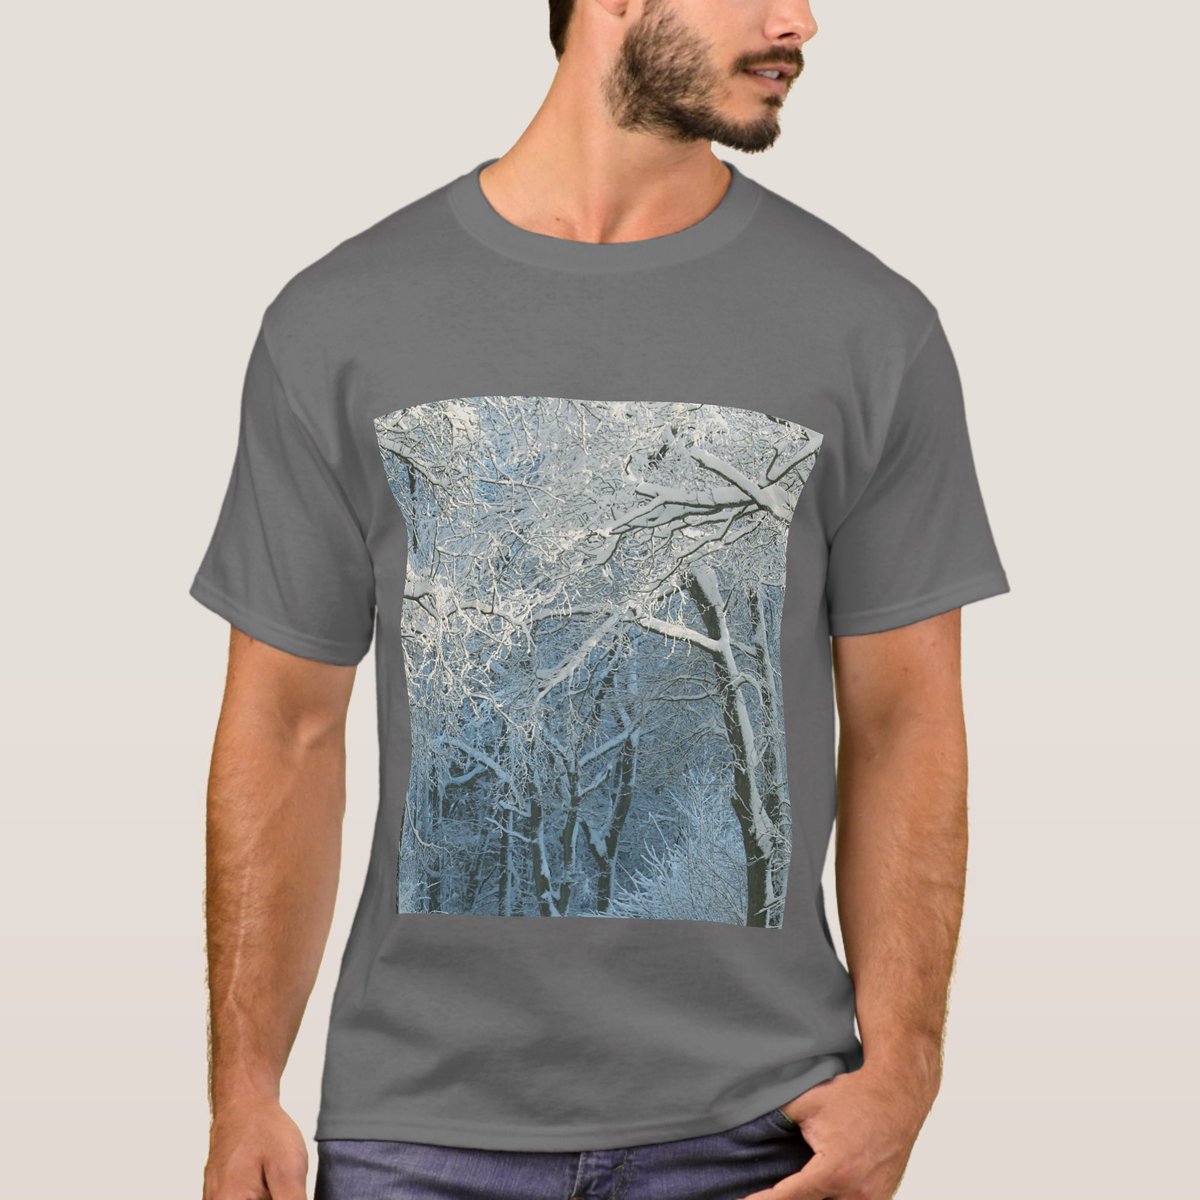 Winter Scene Winter Wonderland Snowy Background  T-Shirt zazzle.co.uk/z/tprnwi5u?rf=… via @zazzle
Cool and stylish T-shirt for him. Makes an elegant Christmas or birthday gift. Check it out! #boyfriendgift #dad #father #giftsforhim #giftsformen #coolgifts #giftsfornaturelovers #snow